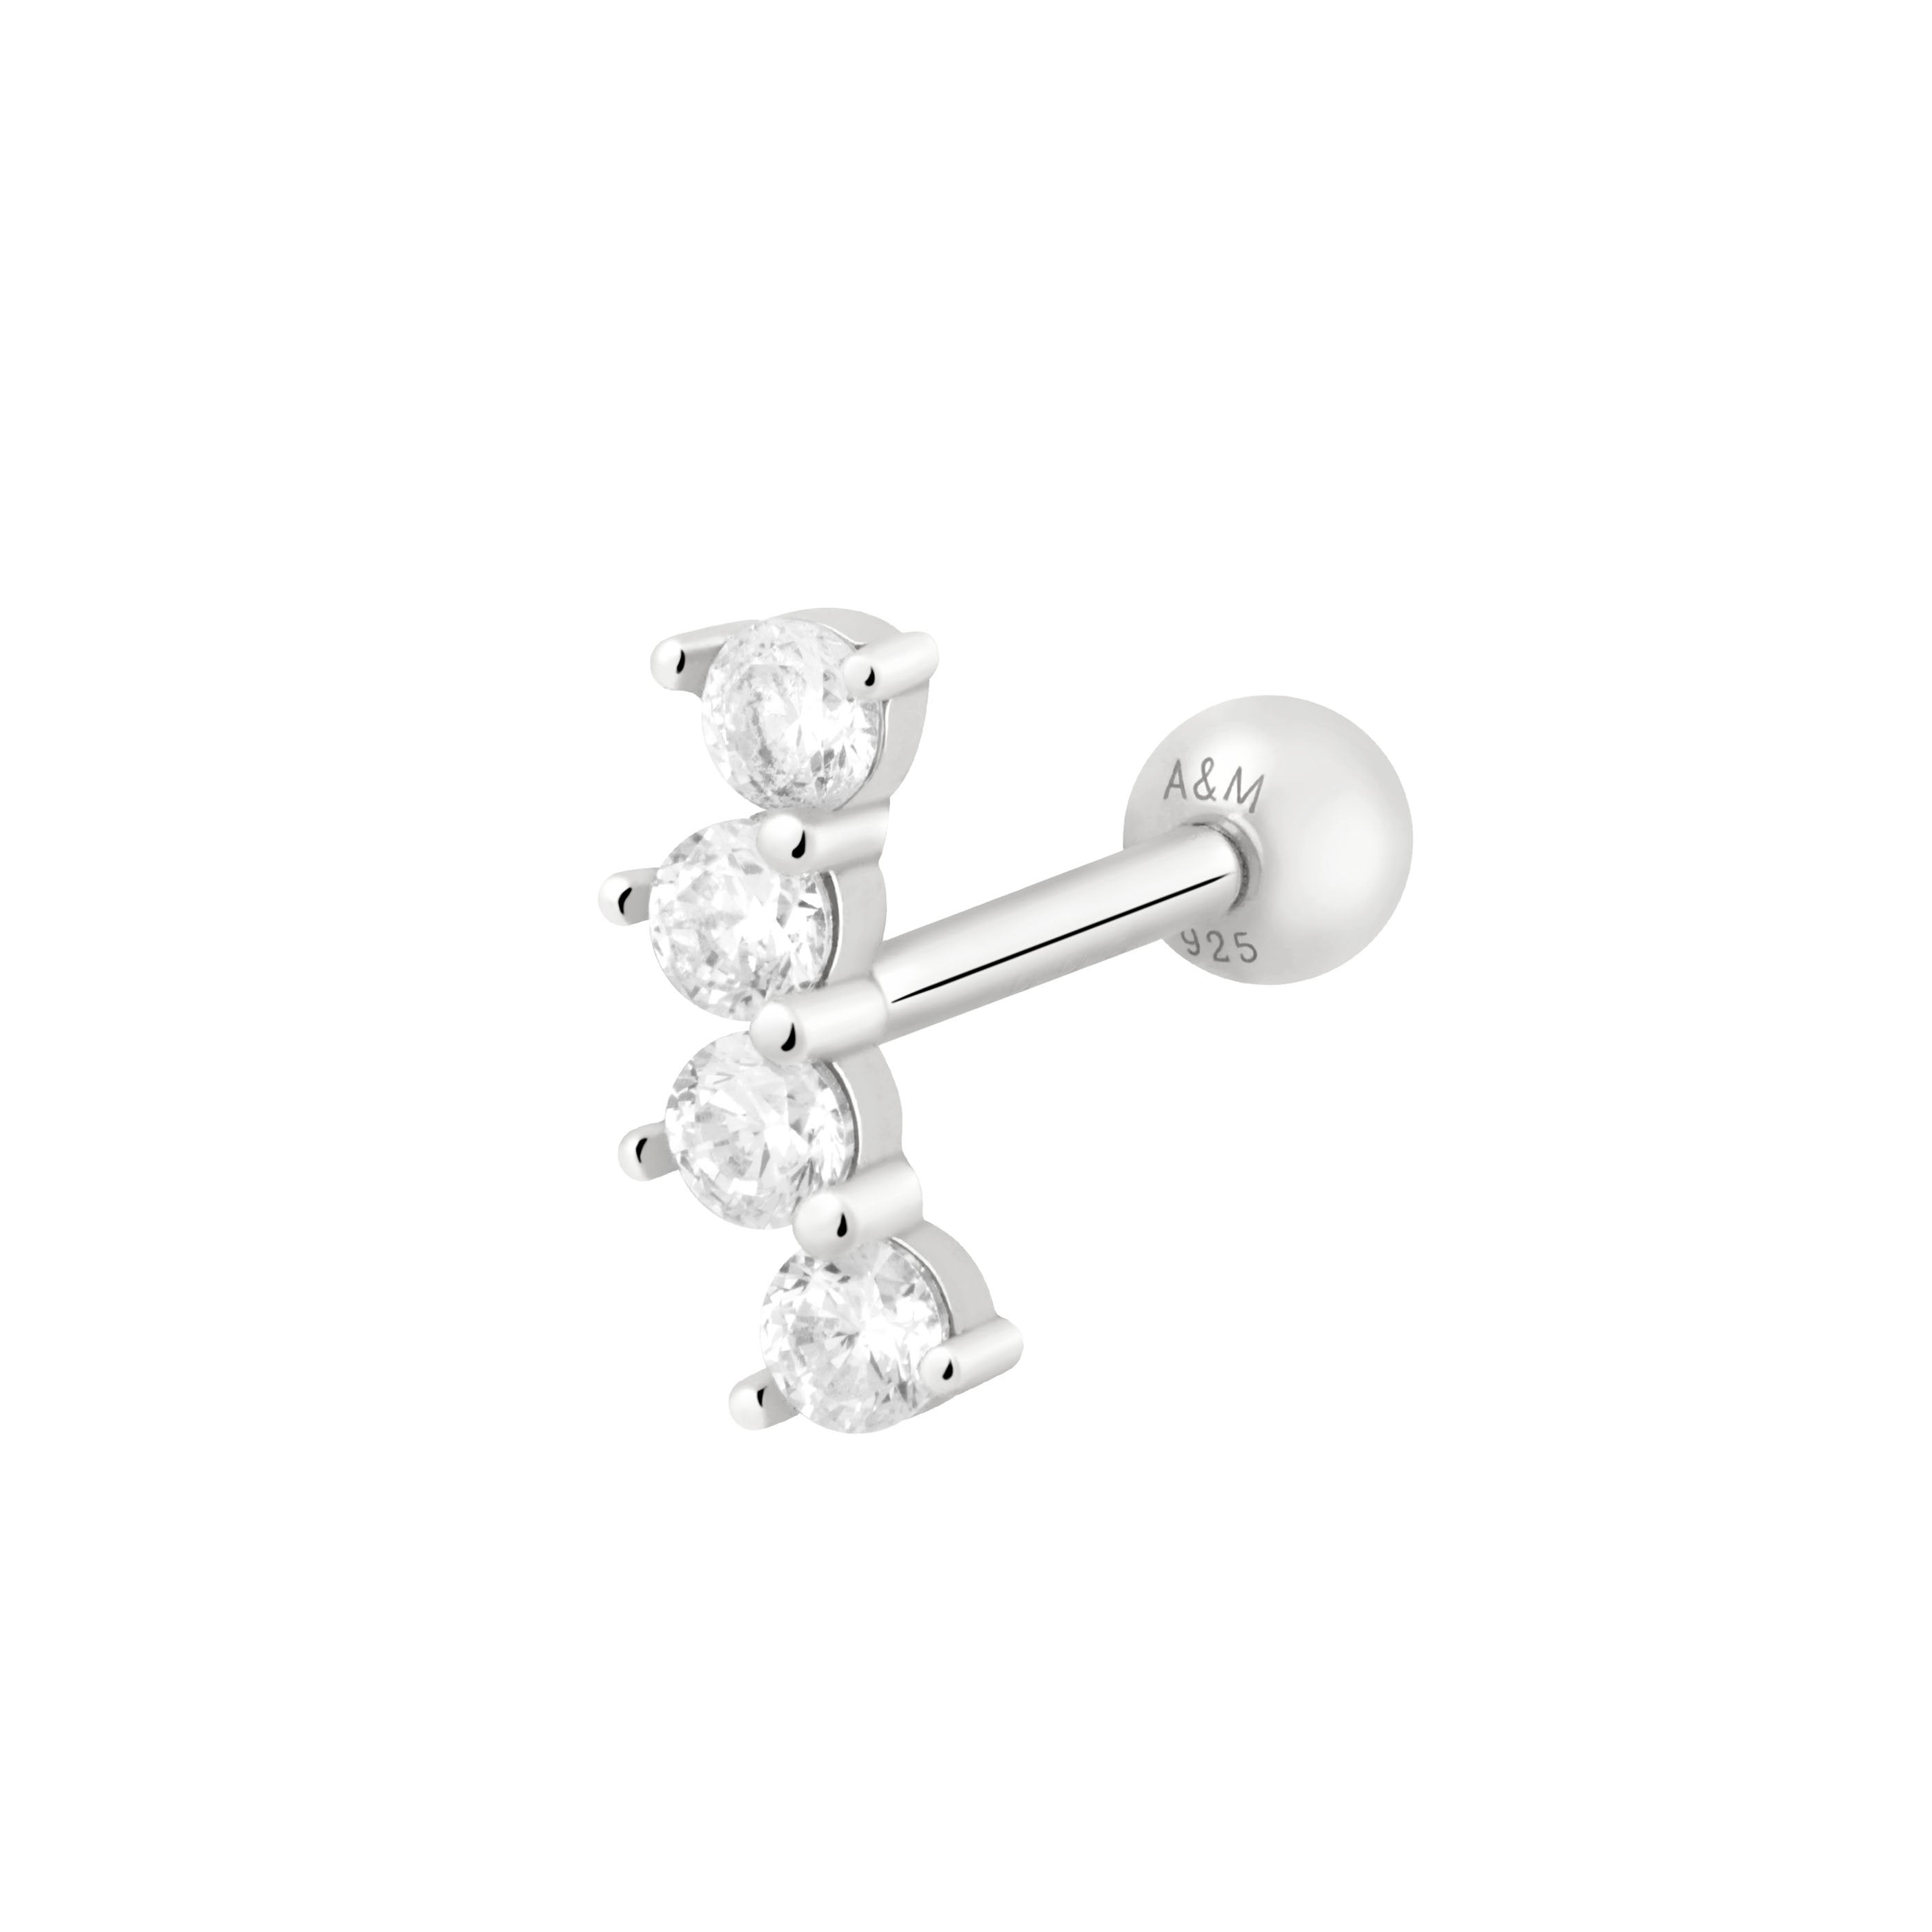 Curved Crystal Barbell in Silver